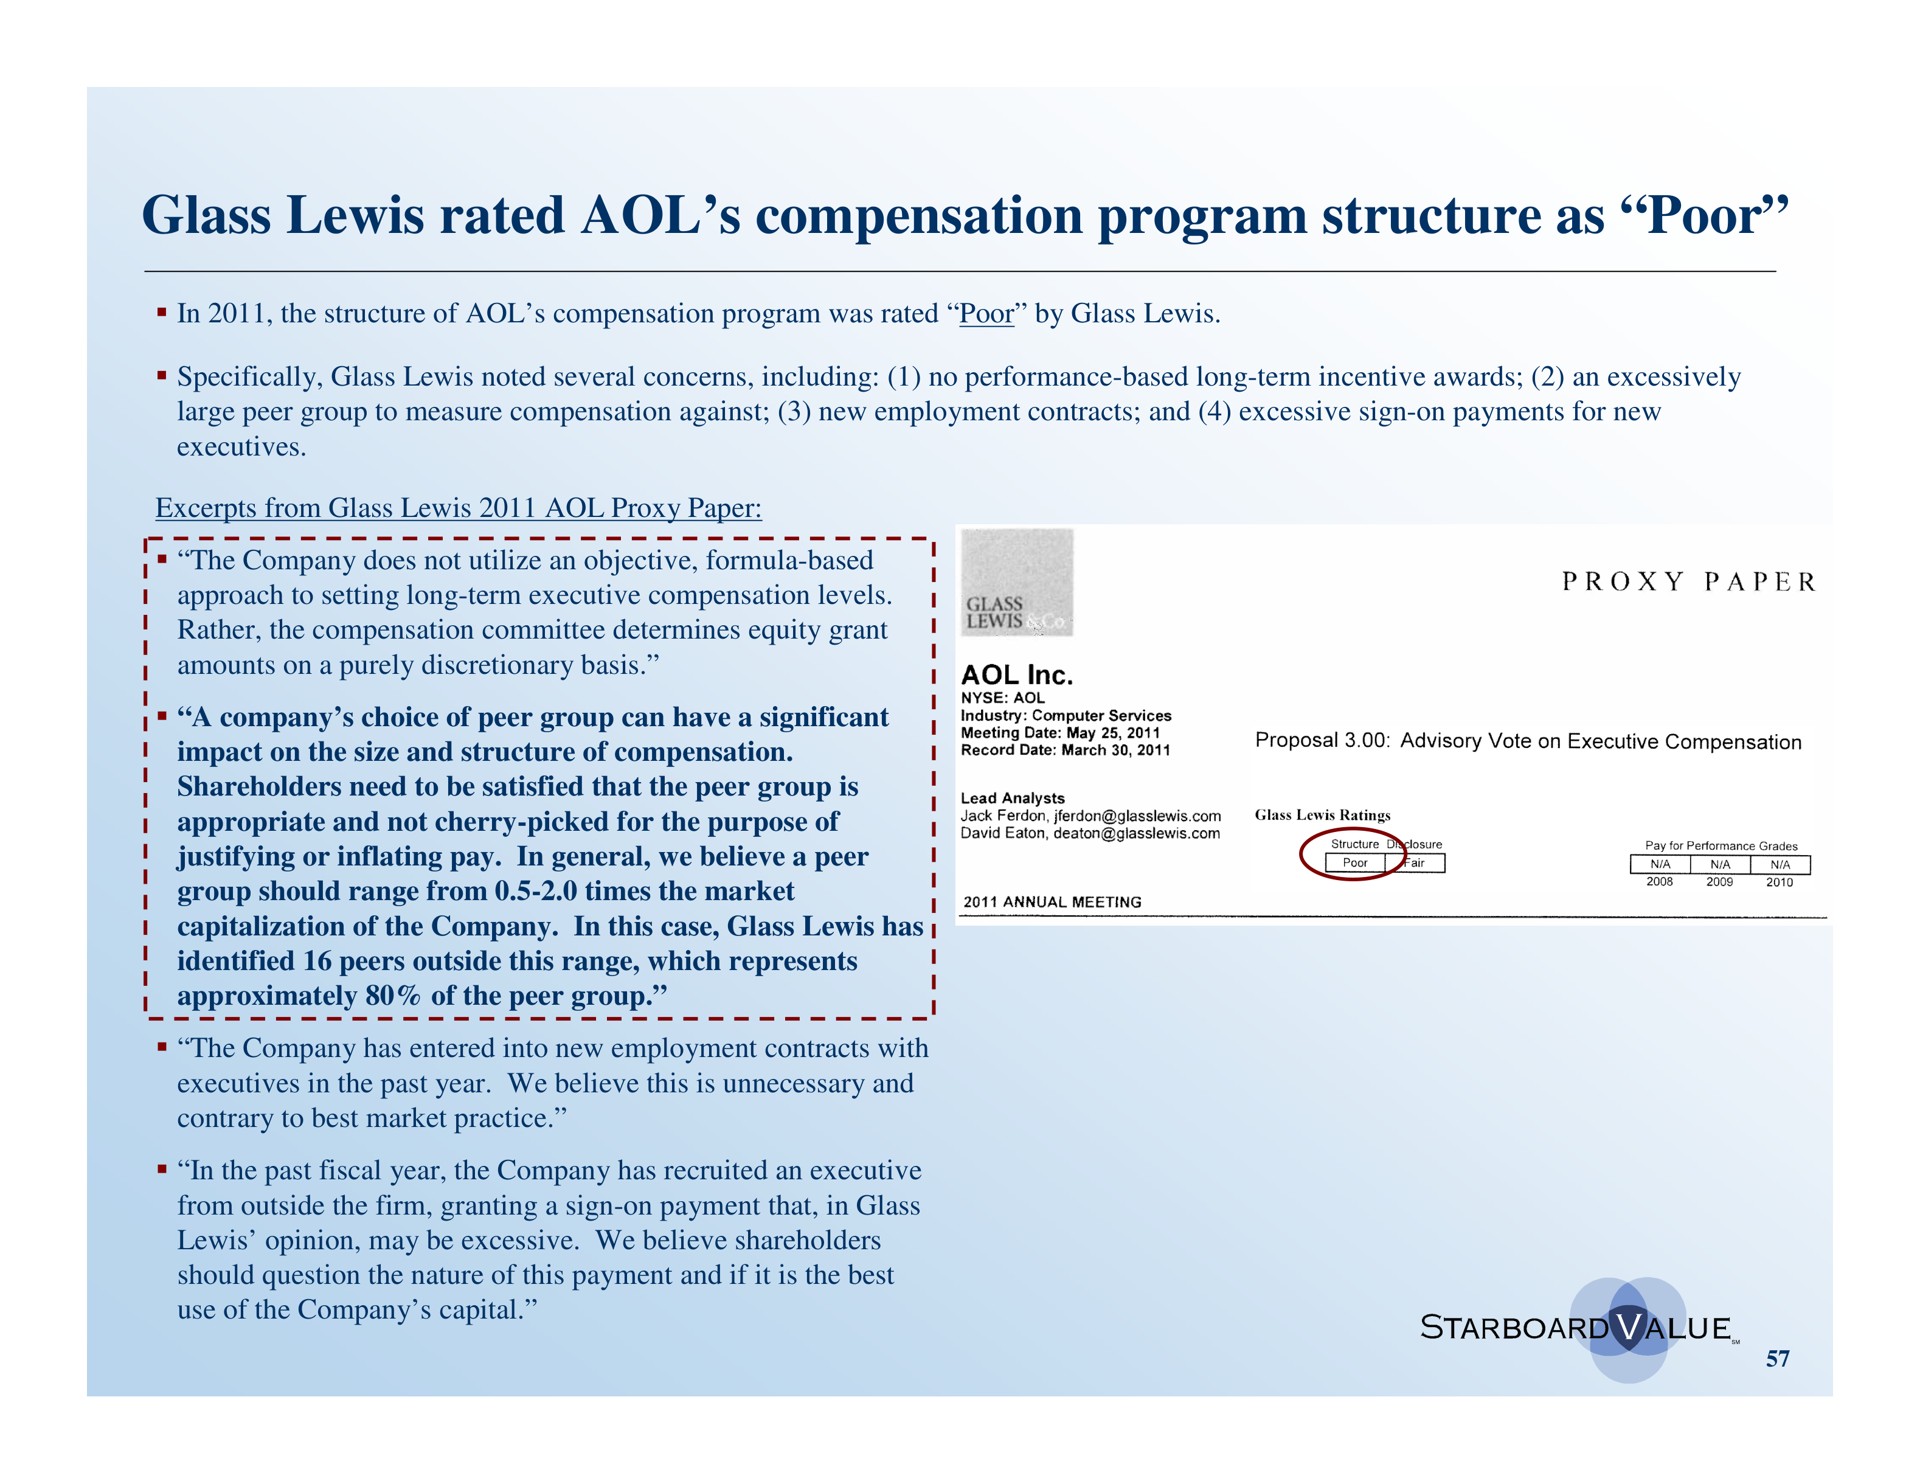 glass lewis rated compensation program structure as poor | Starboard Value